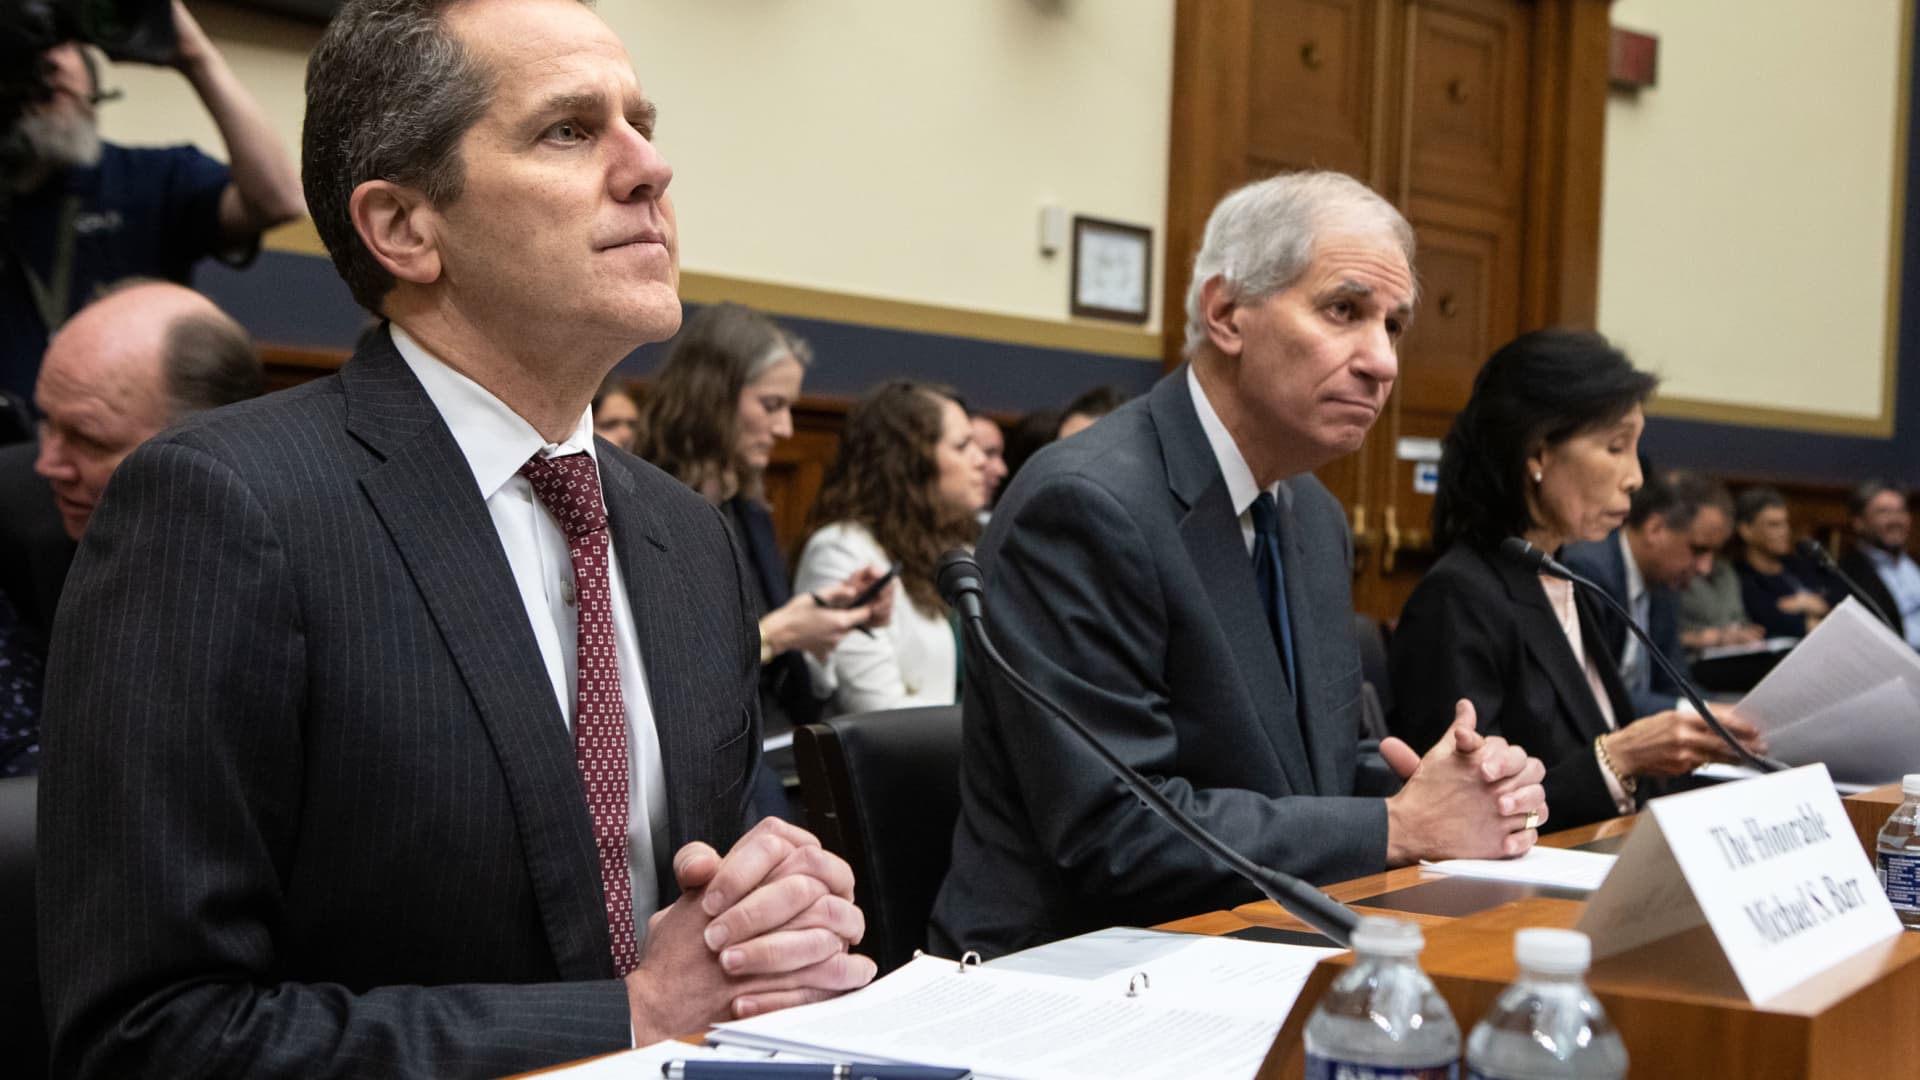 House lawmakers tear into top bank regulators in second hearing this week on collapse